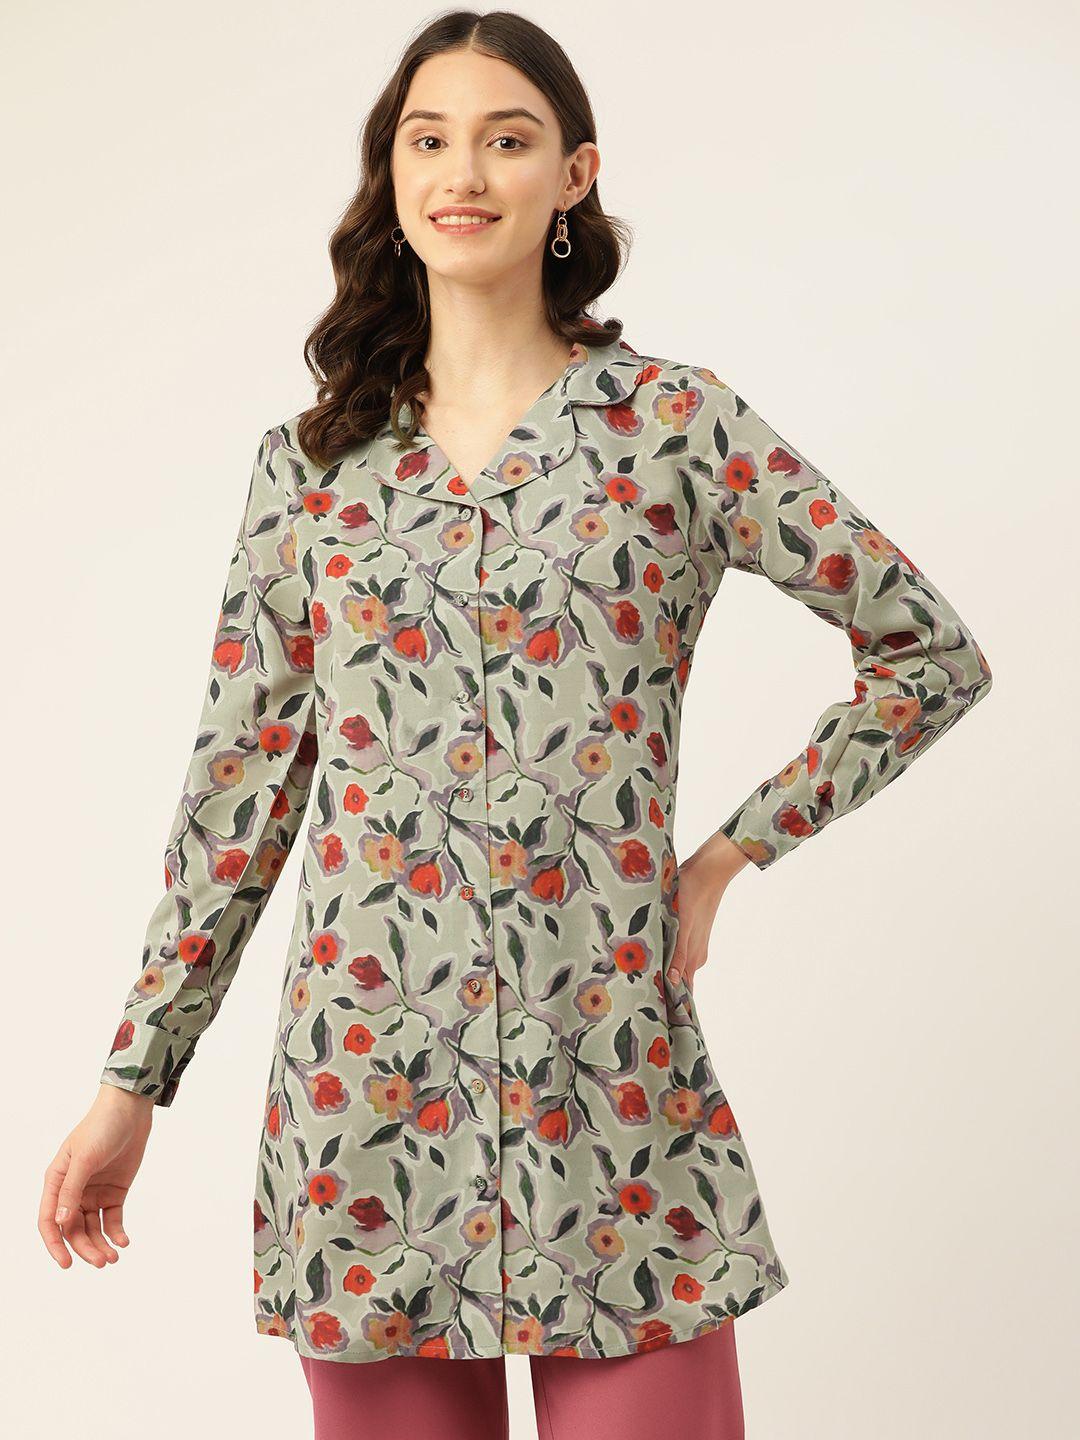 rue collection floral print crepe shirt style longline top